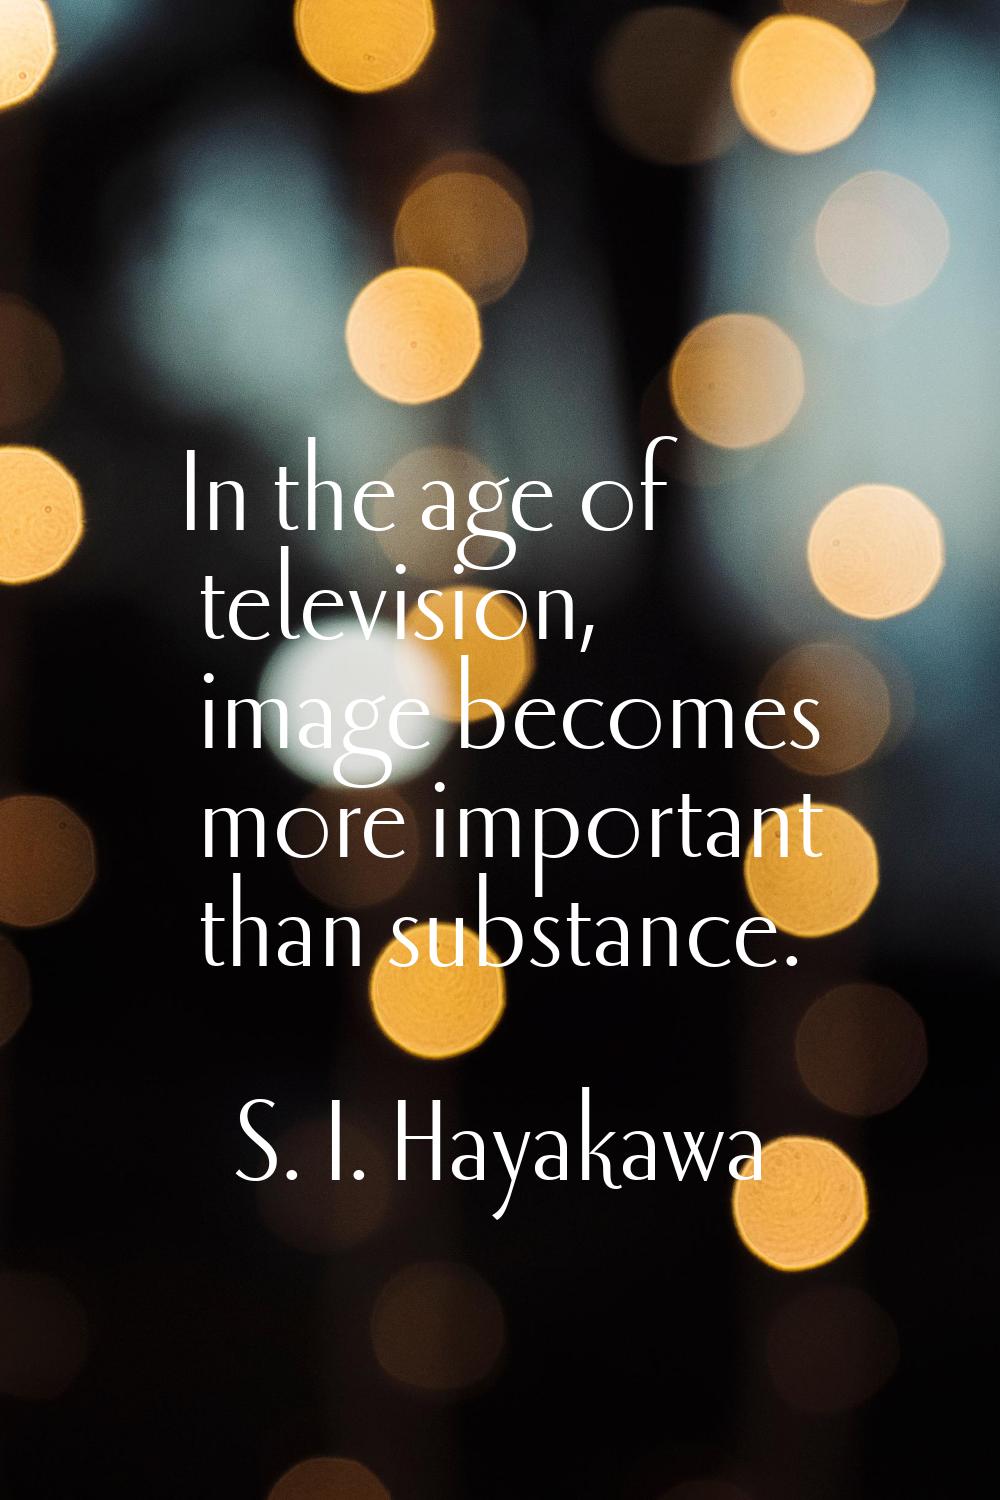 In the age of television, image becomes more important than substance.